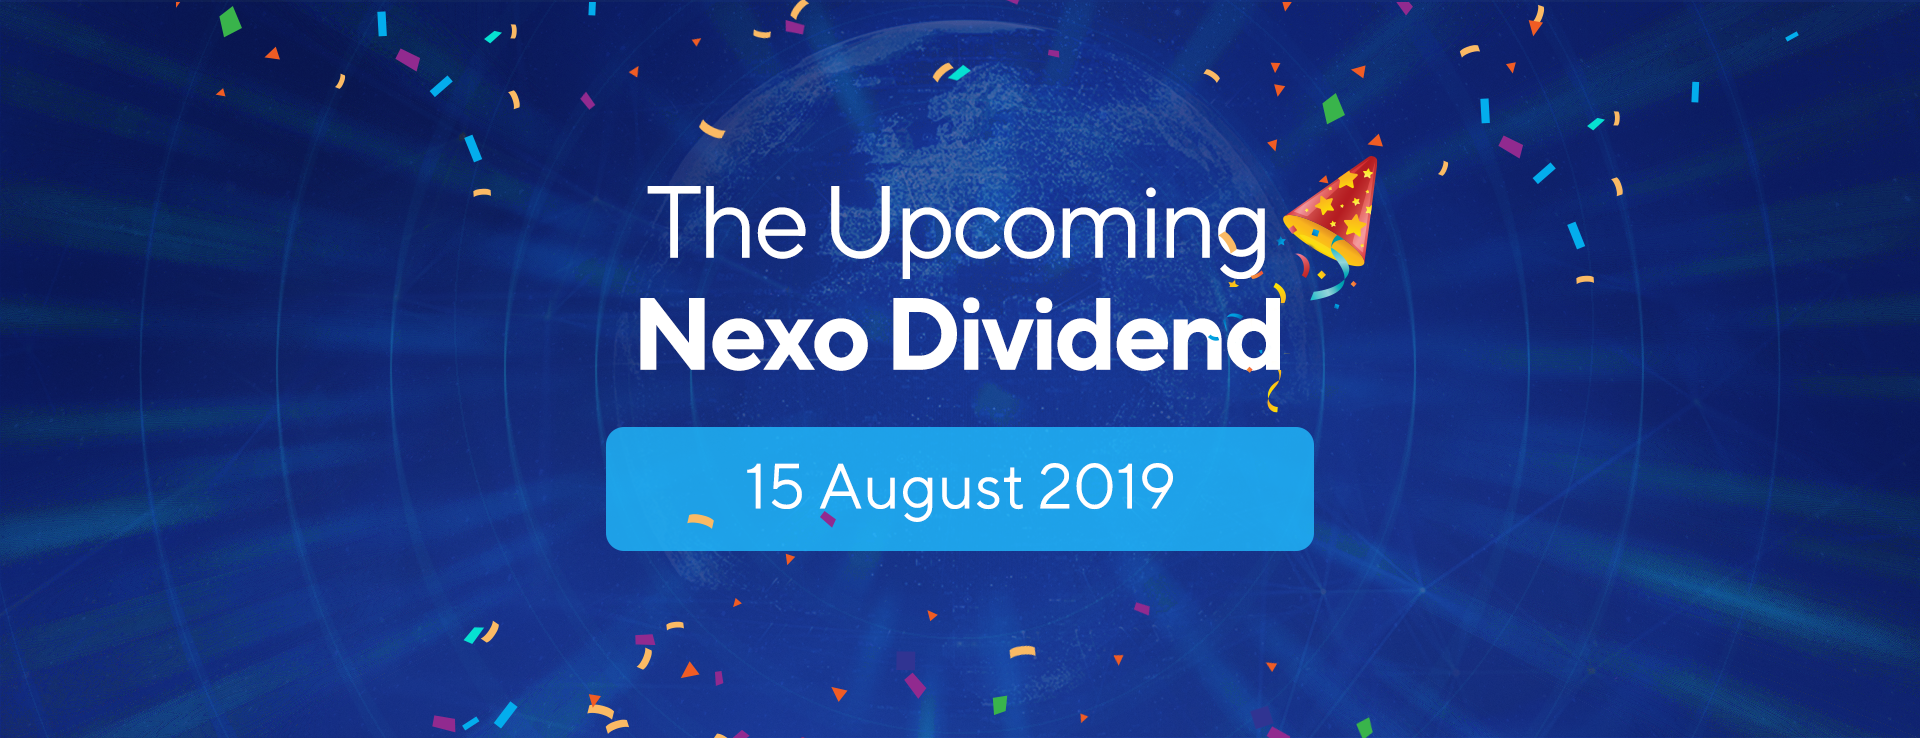 The Upcoming Nexo Dividend Is on August 15, 2019